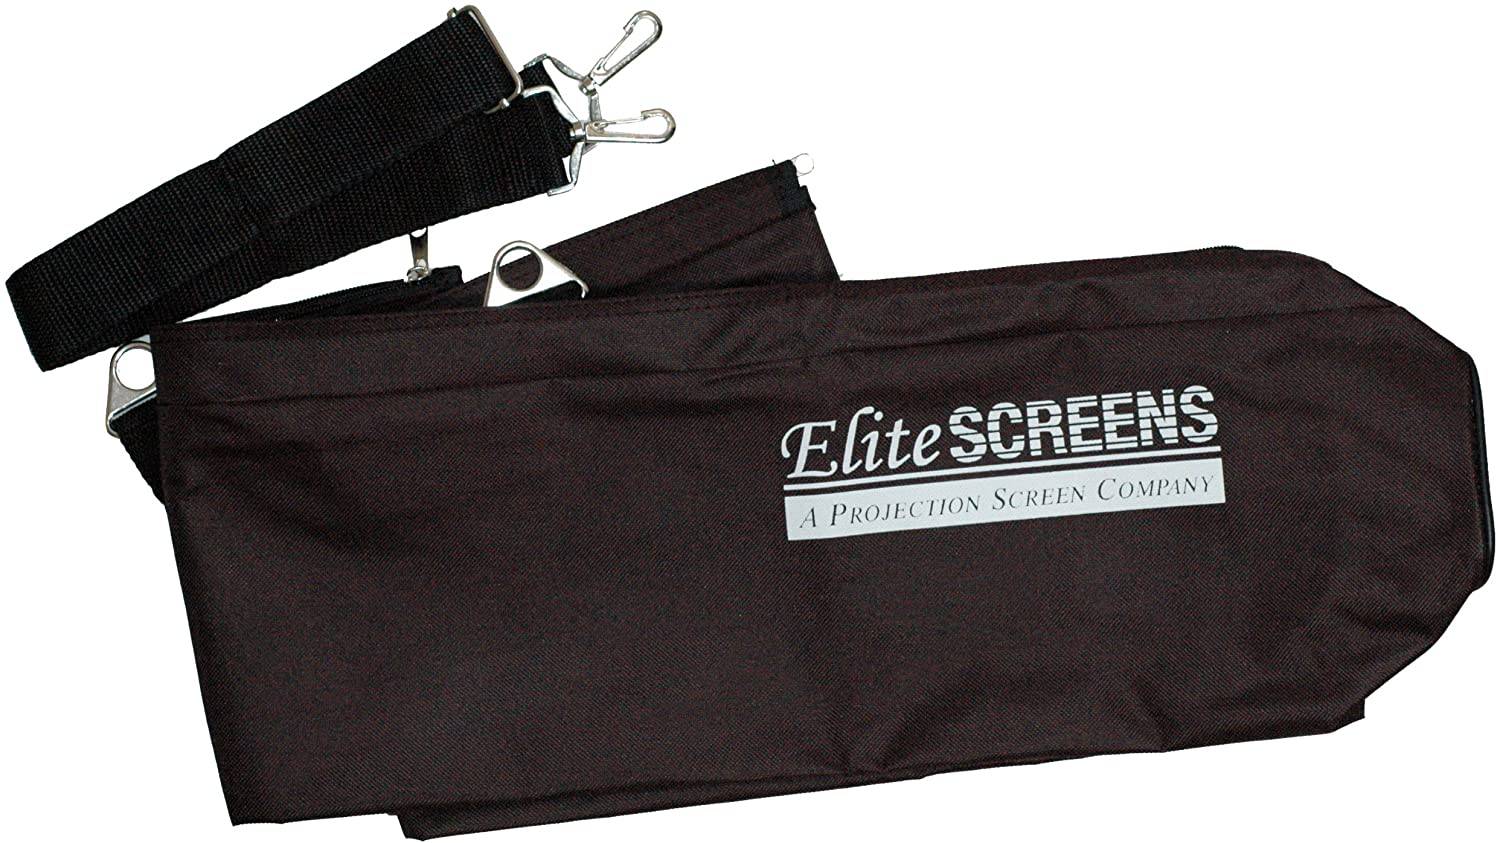 Elite Screens Tripod Screen Carrying Bag for Tripod Series Models: T85UWS1, T85NWS1 and T72UWH, T85UWS1-PRO